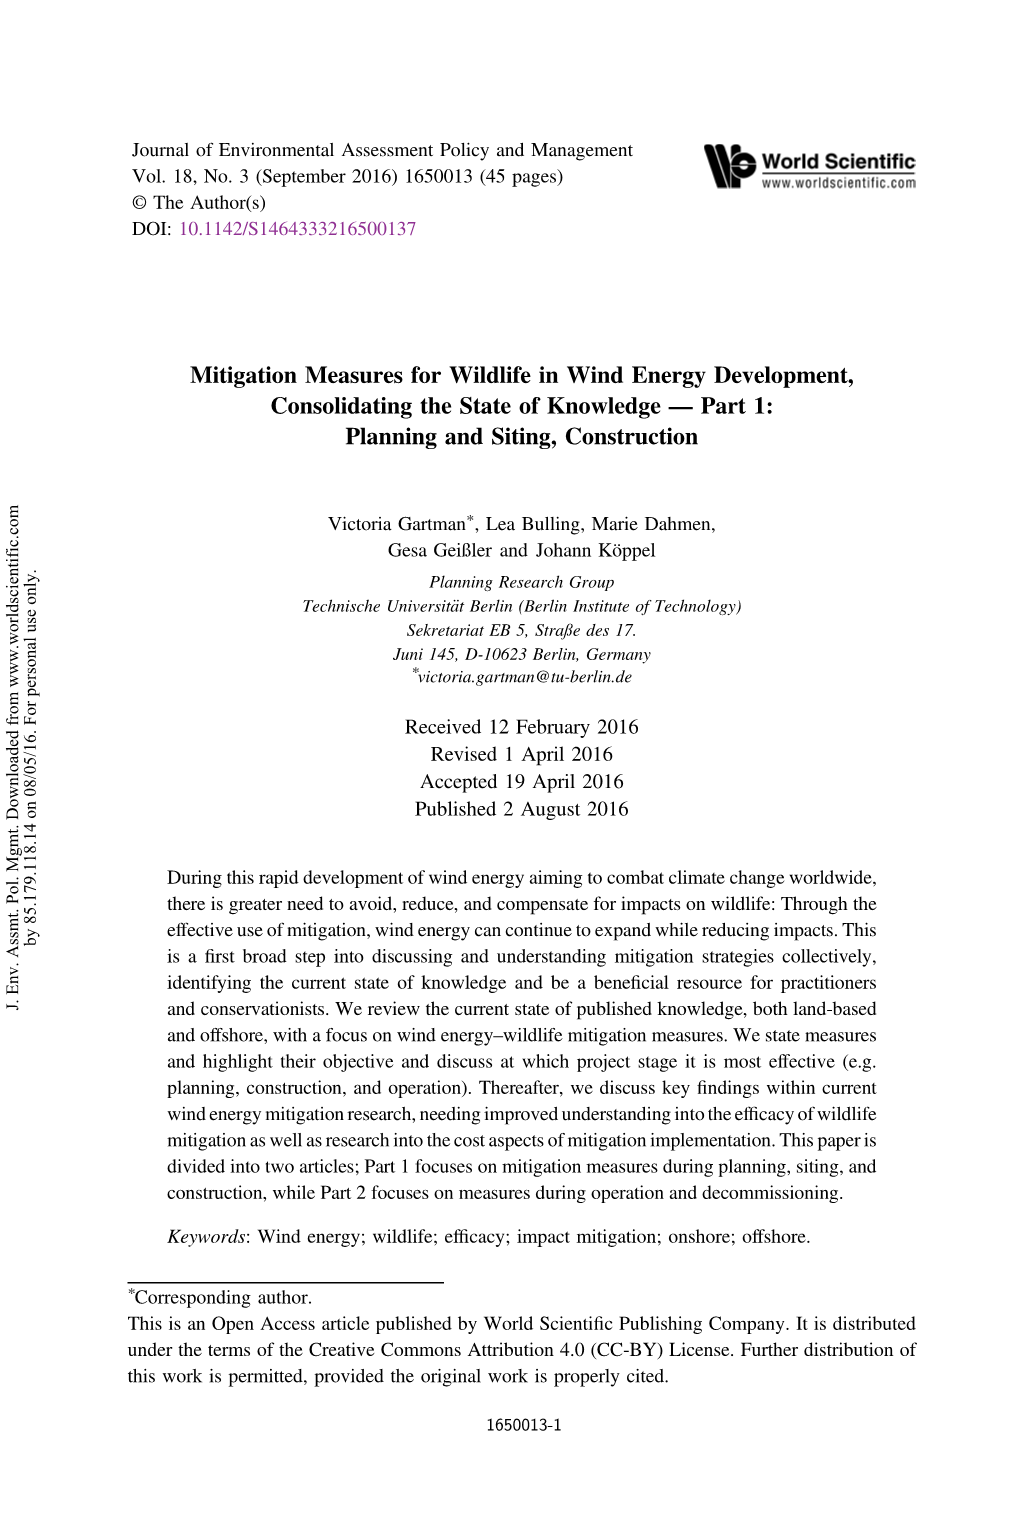 Mitigation Measures for Wildlife in Wind Energy Development, Consolidating the State of Knowledge — Part 1: Planning and Siting, Construction